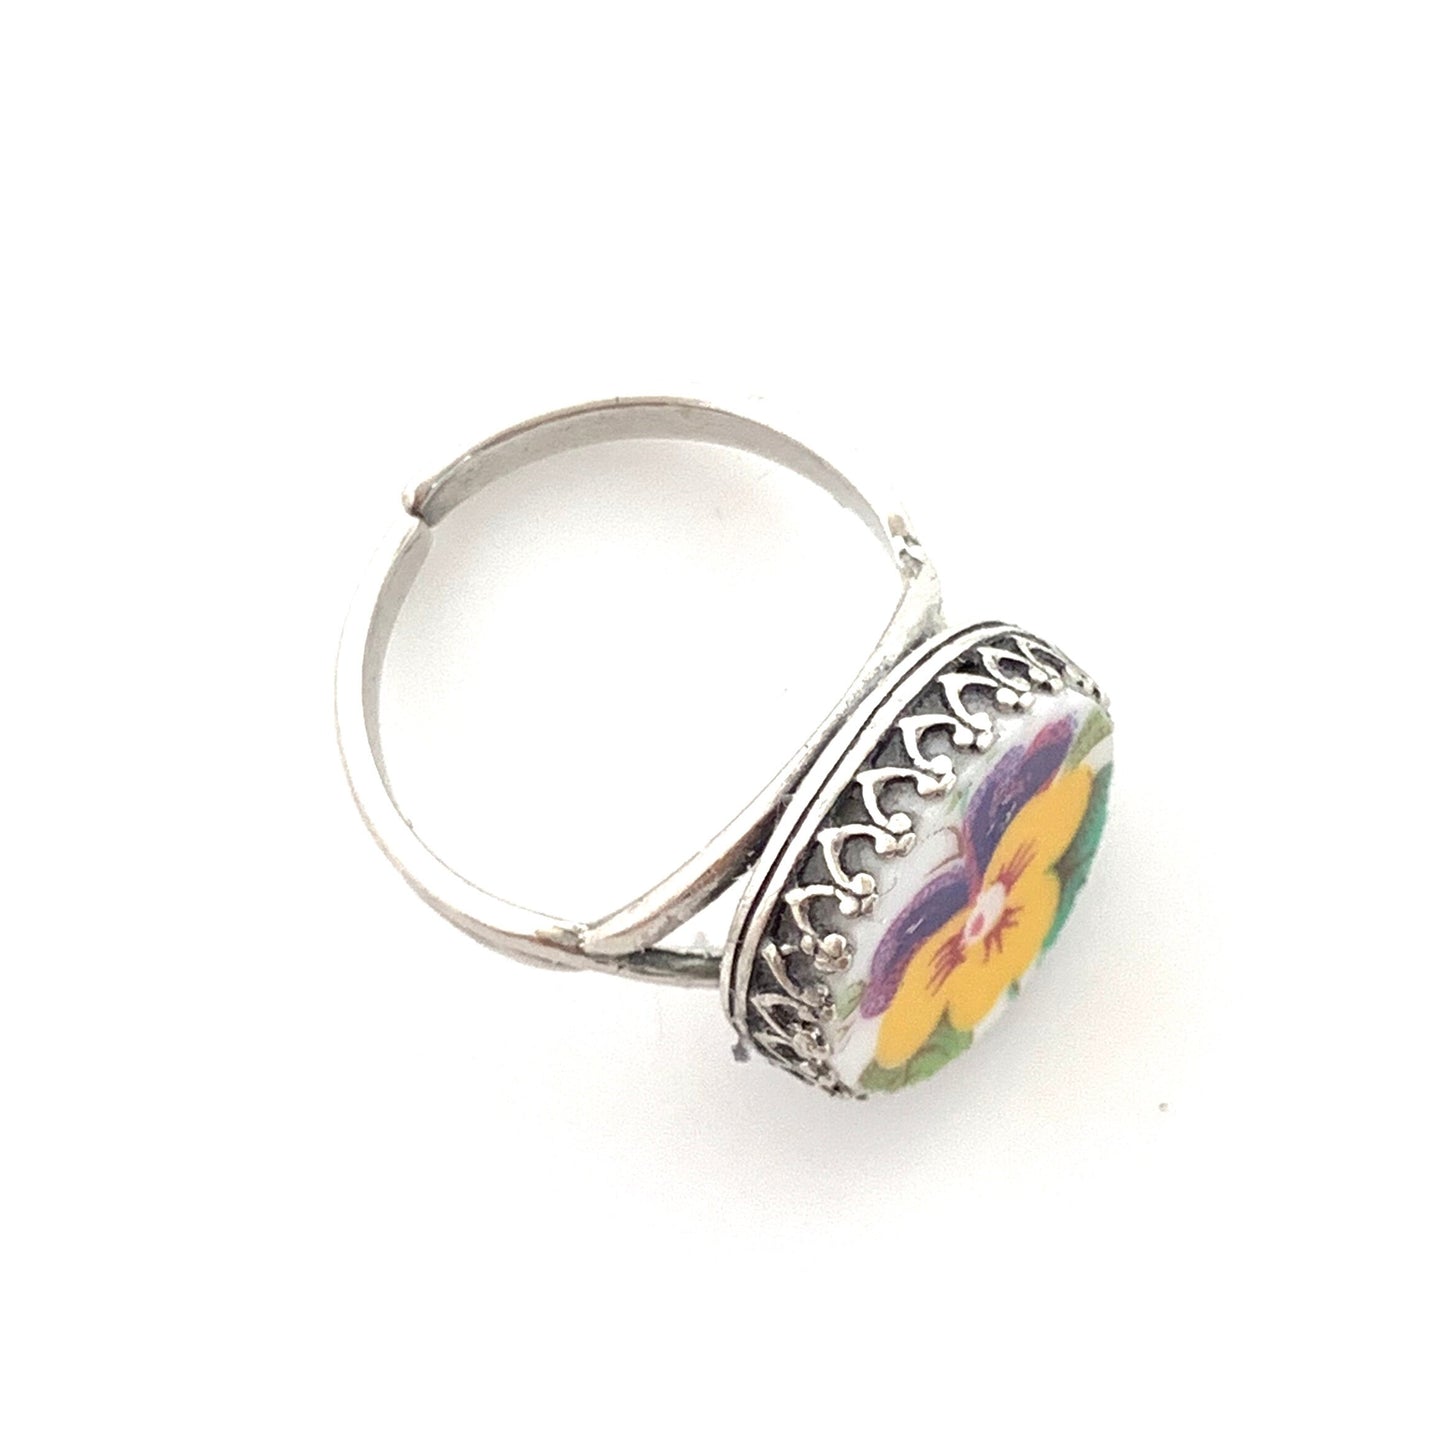 Pansy Vintage China Broken China Jewelry, Adjustable Silver Rings for Women, Anniversary Gifts for Her